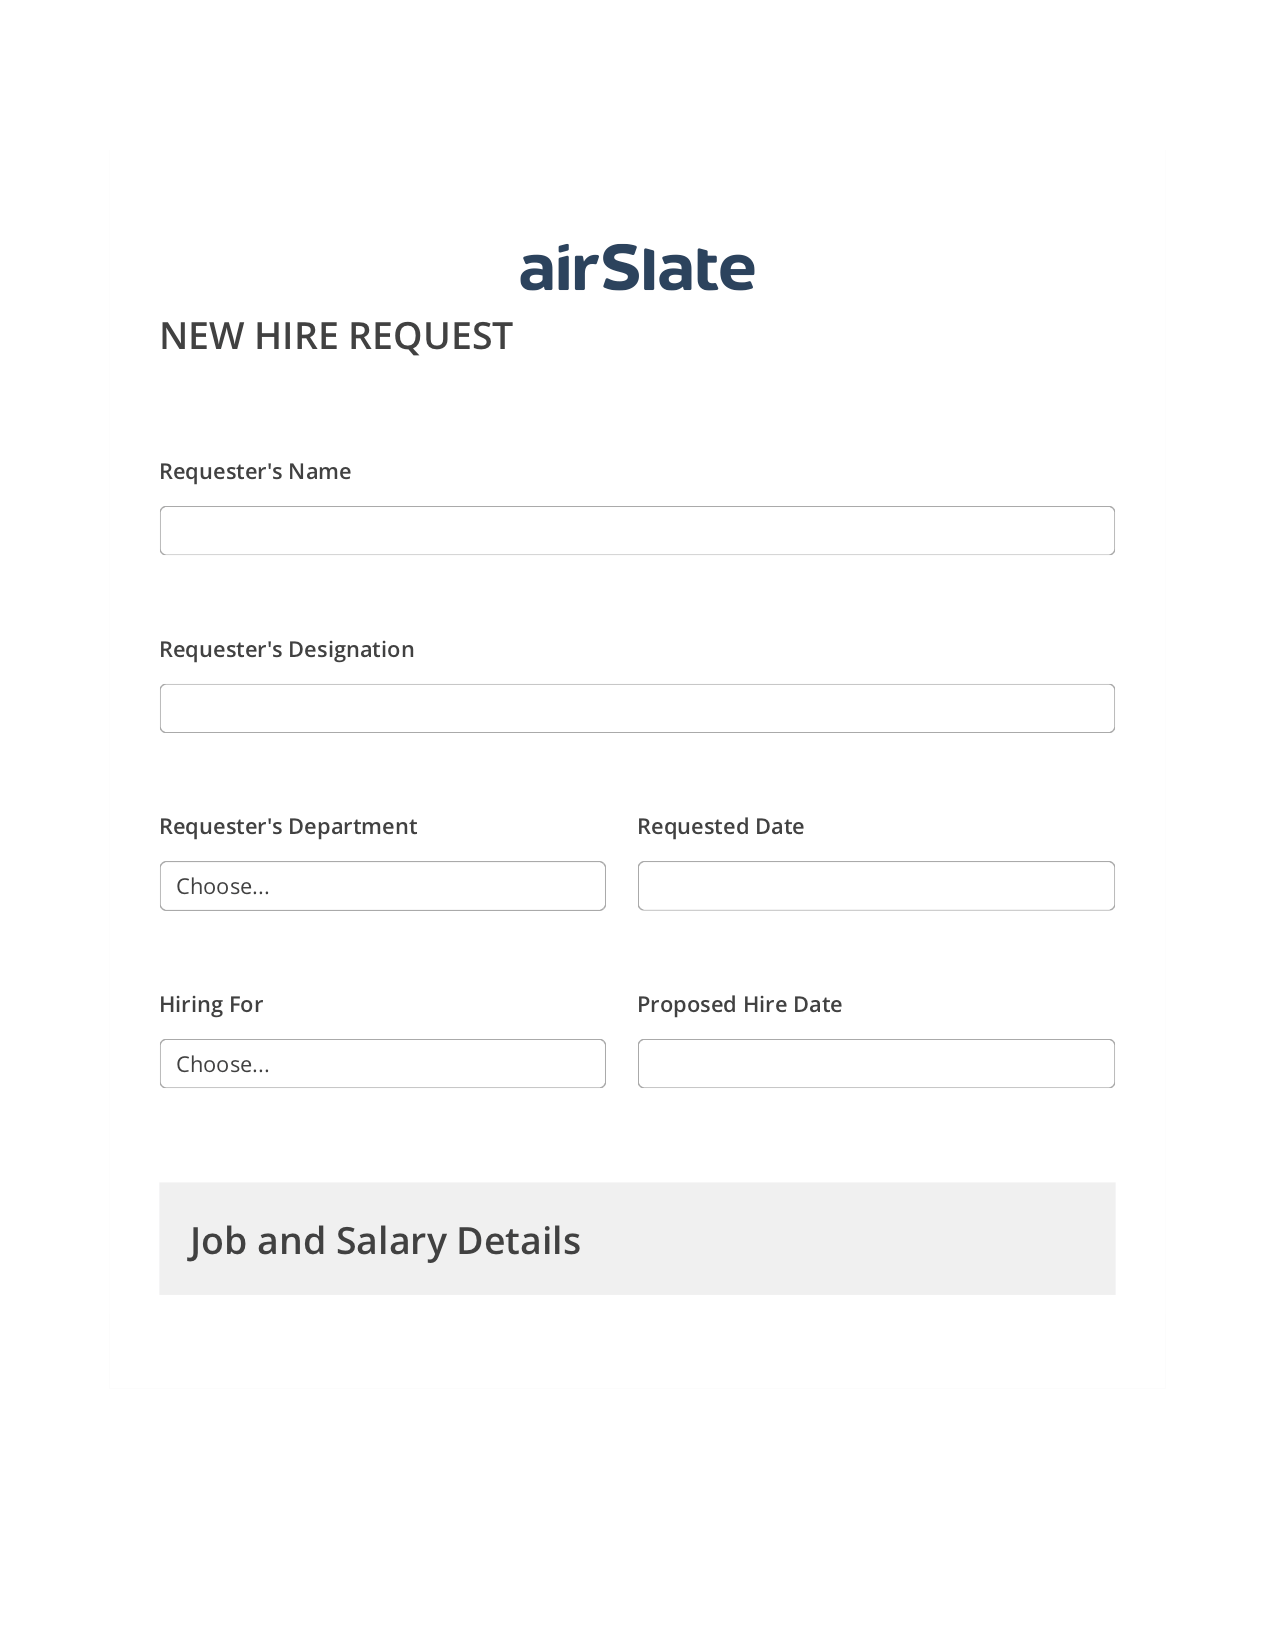 Hiring Request Workflow Pre-fill from MySQL Bot, Create Slate every Google Sheet Update Bot, Archive to Box Bot